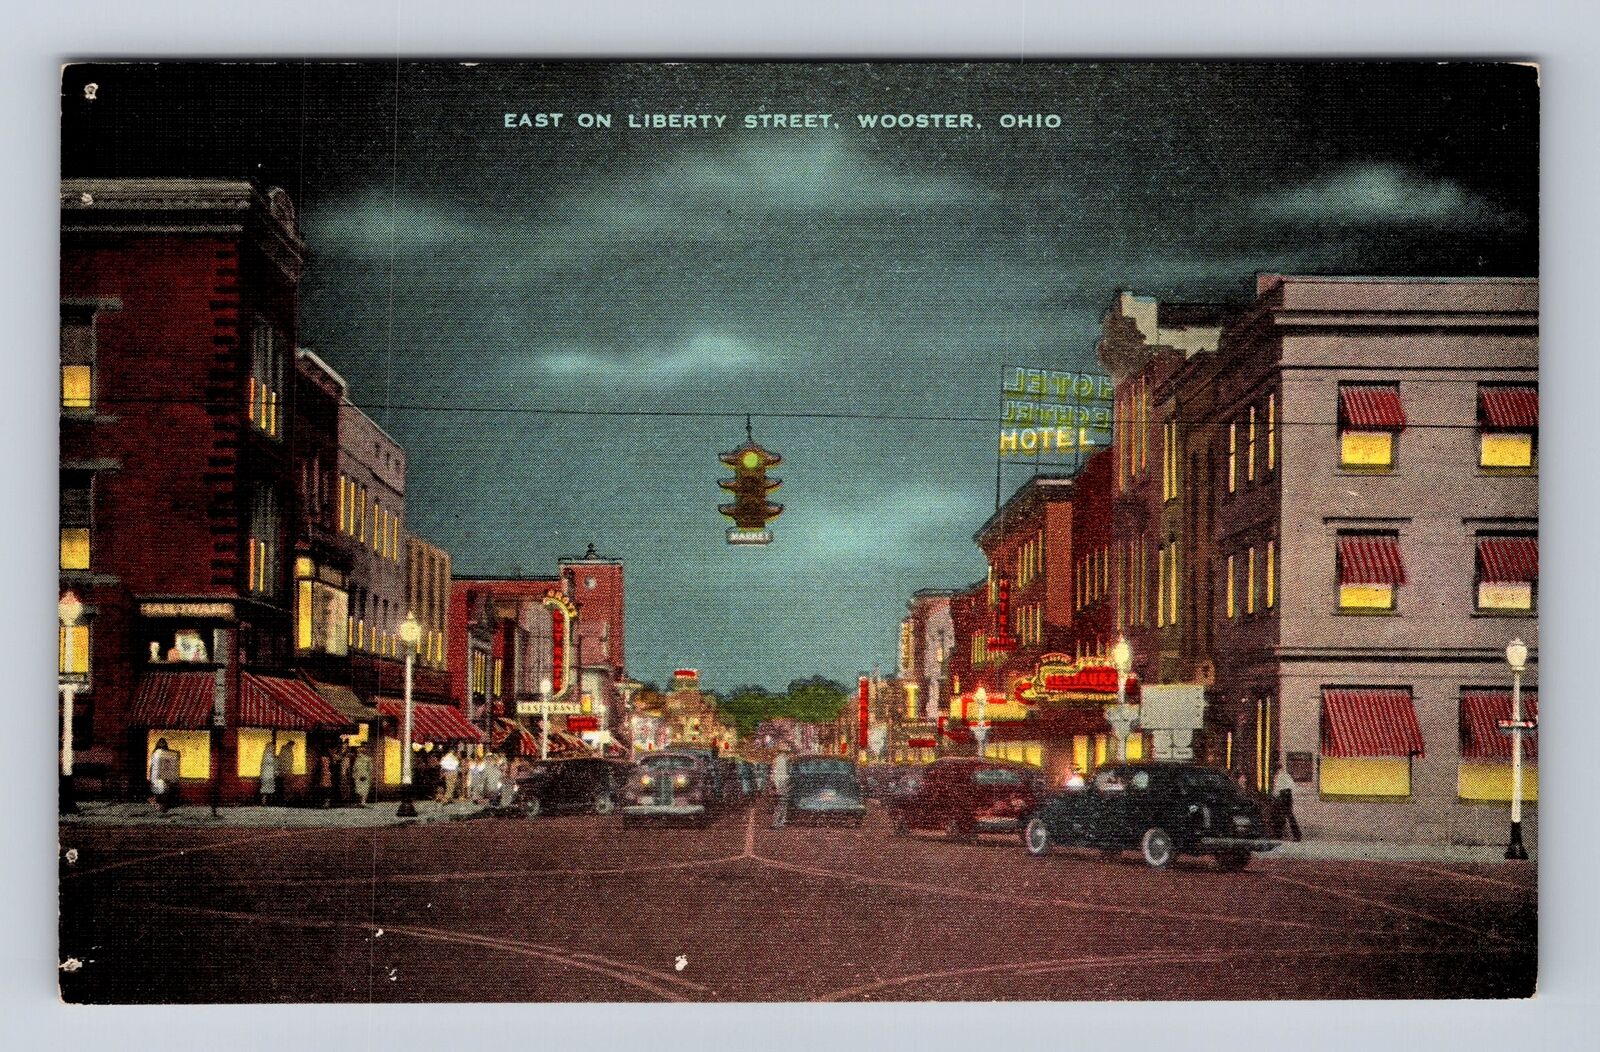 Wooster OH-Ohio, Main Business District, Liberty Street East, Vintage Postcard